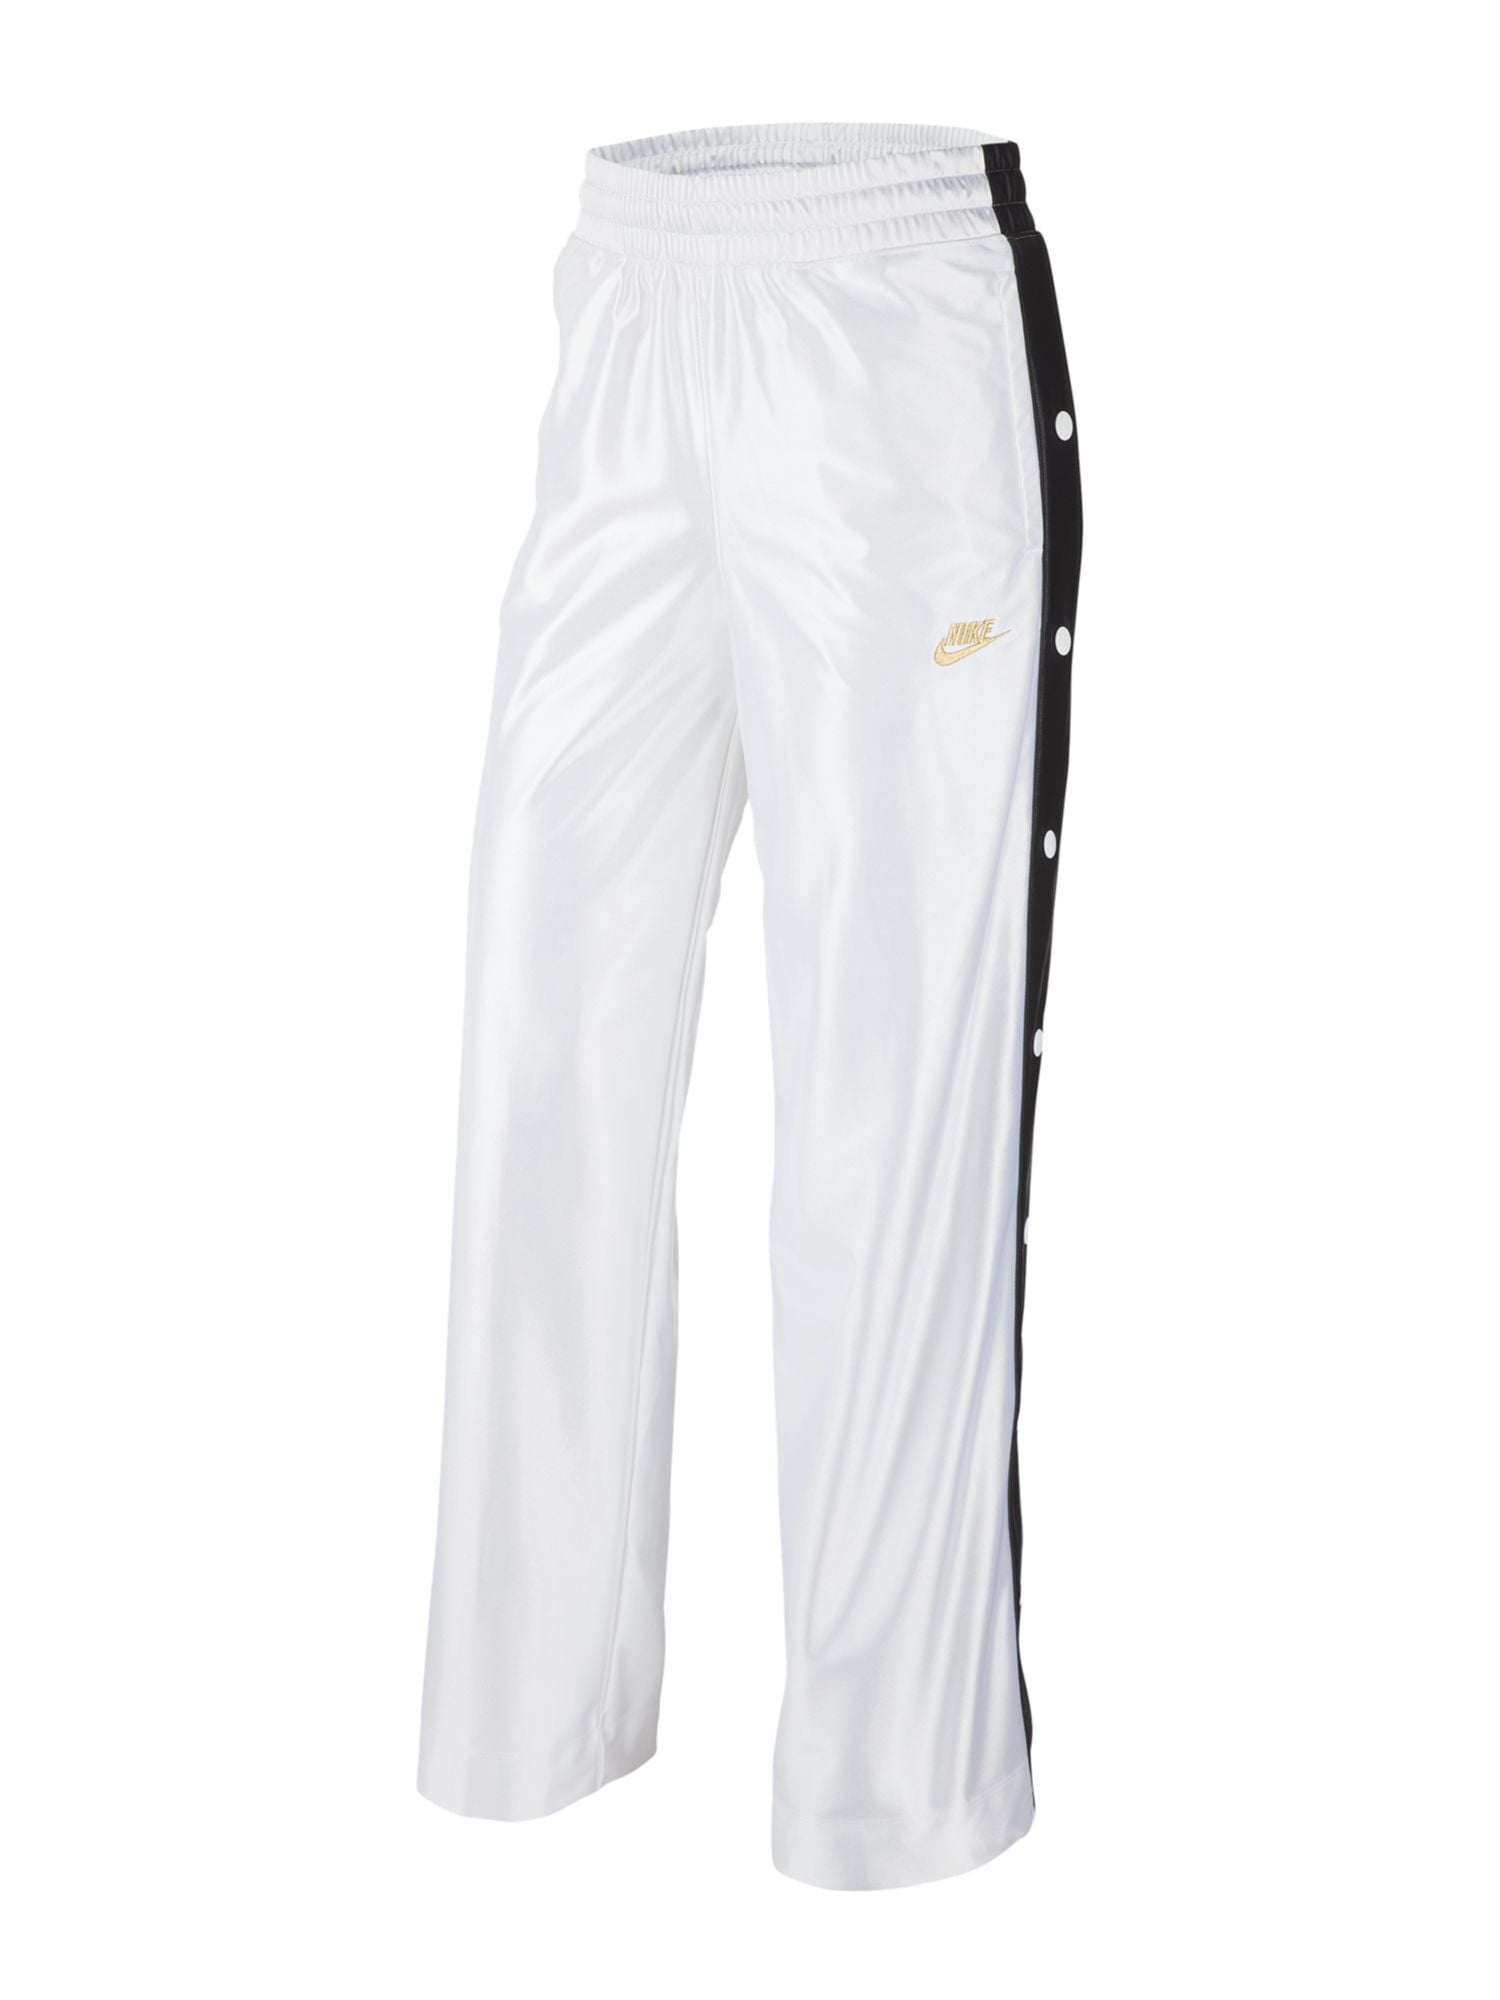 NIKE Womens White Snapped Up Legs Color Block Active Wear Pants Size: XL 